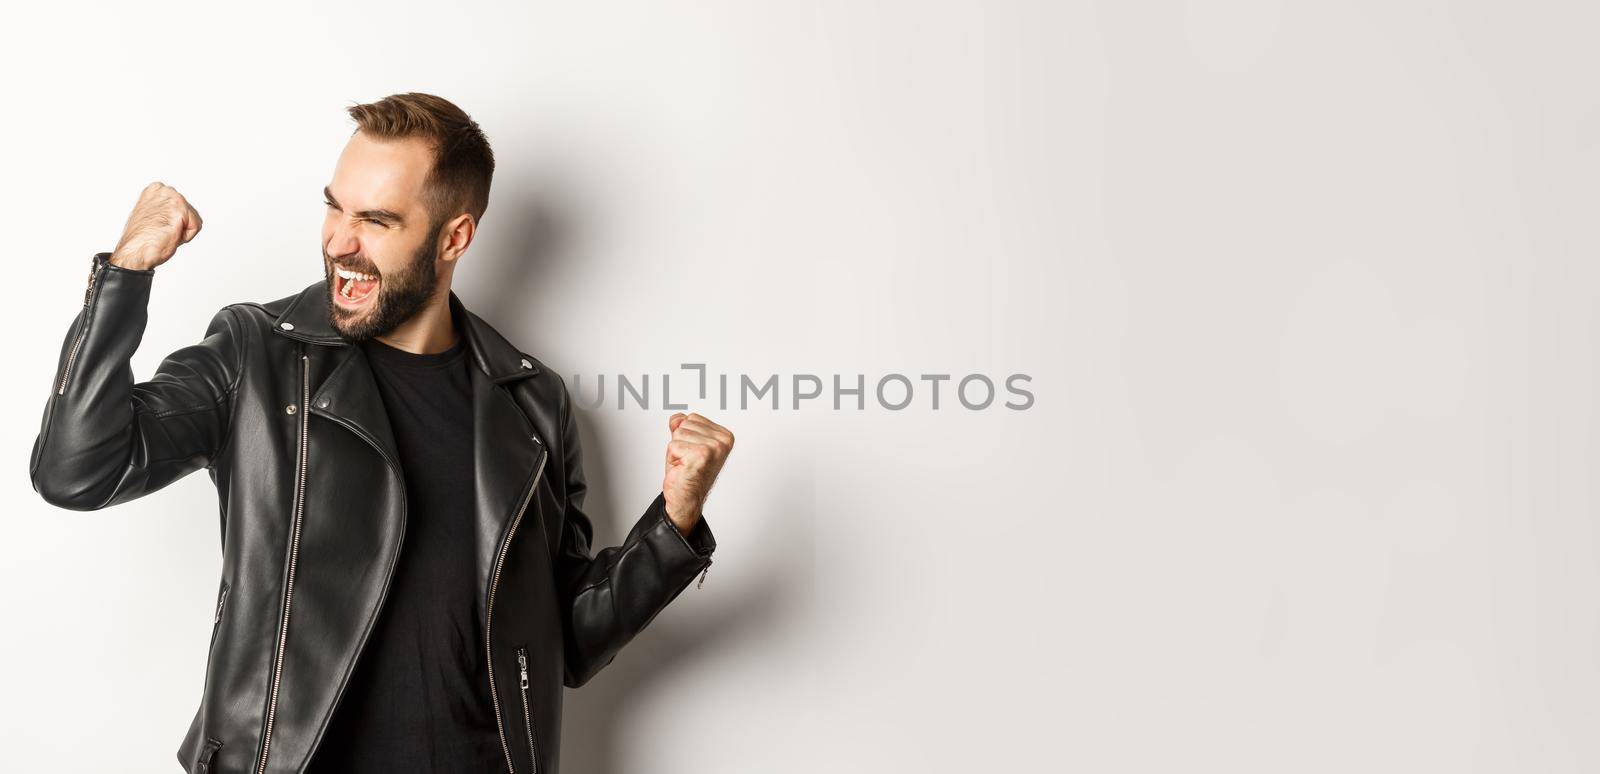 Confident bearded man celebrating victory, winning prize, making fist pump and rejoicing, wearing black leather jacket, white background.